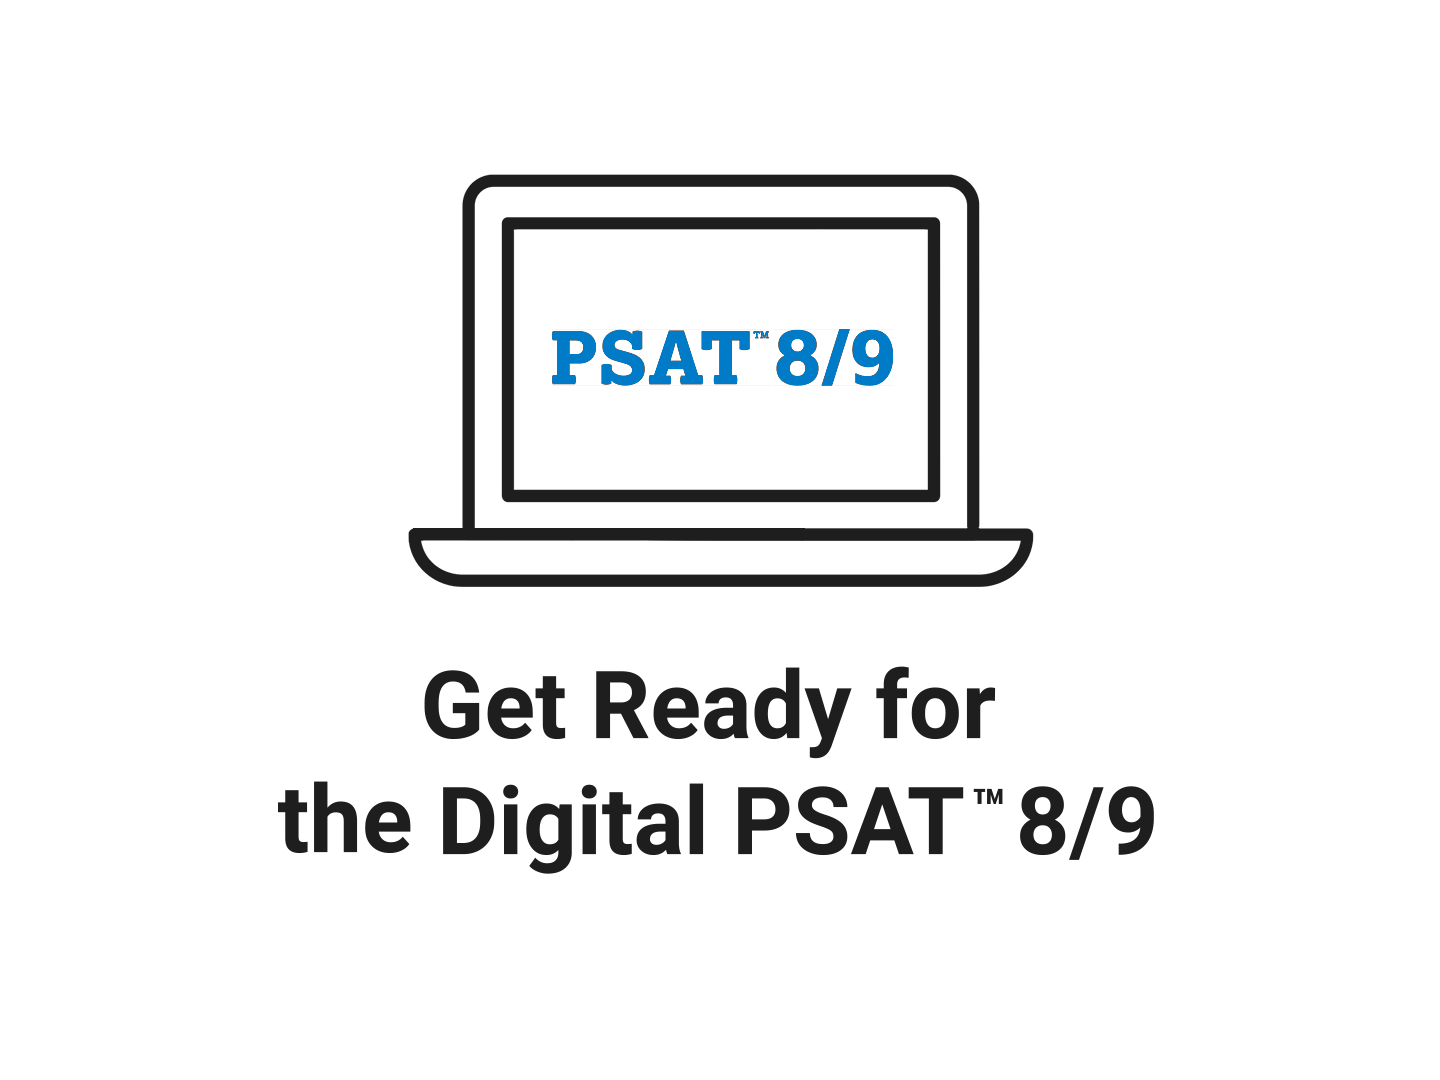 placecard with illustration of laptop with text "Get Ready for the Digital PSAT 8/9"